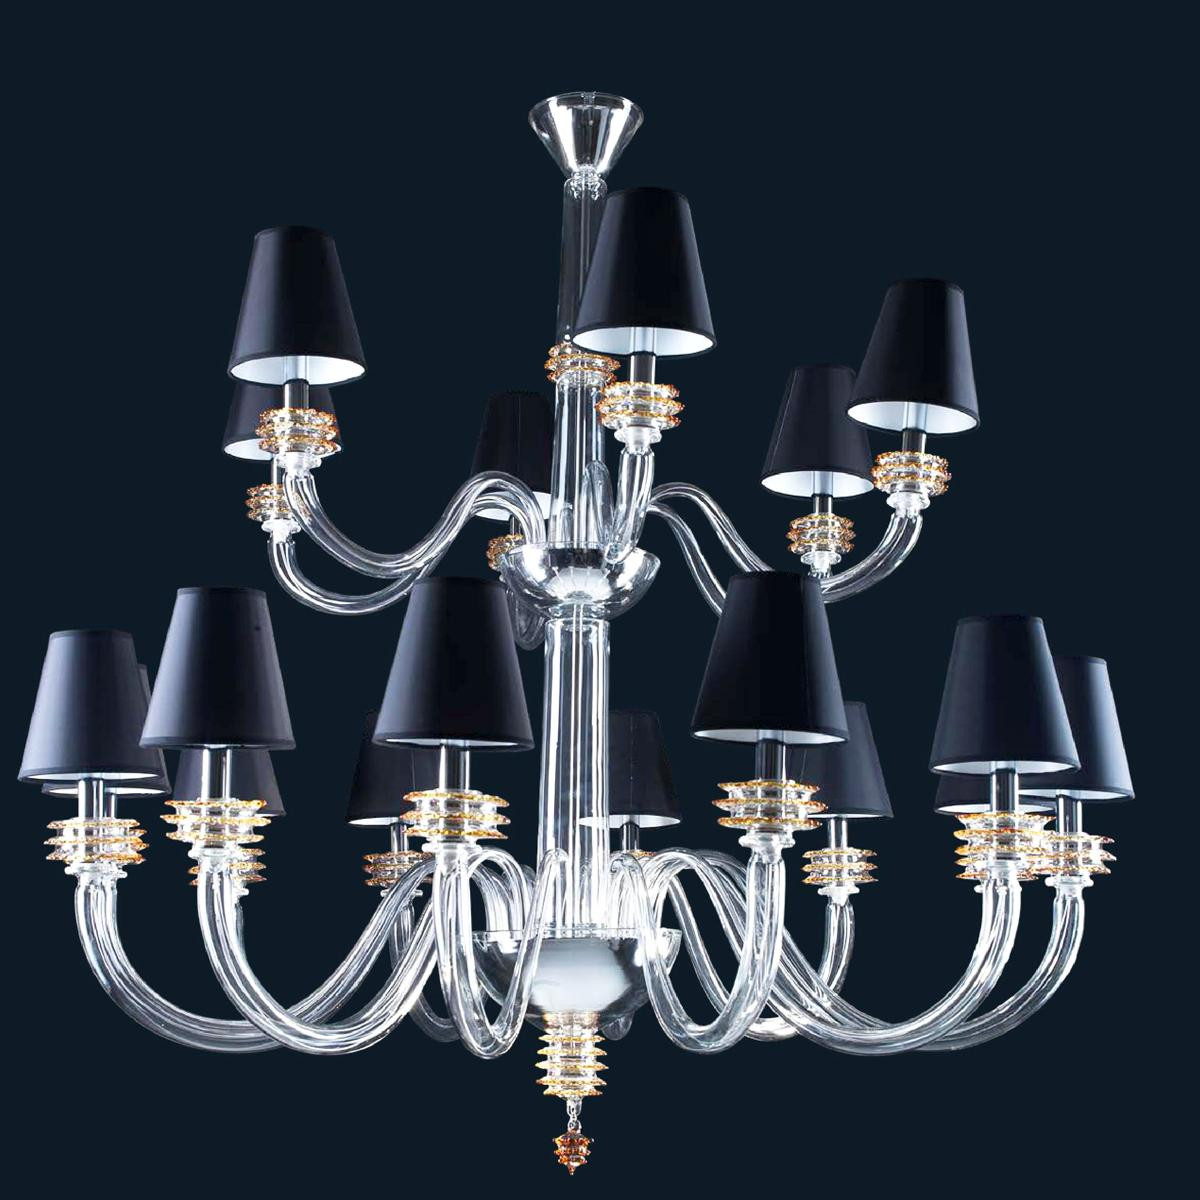 Dainton Murano Glass Chandelier With, Small Glass Chandelier Lamp Shades